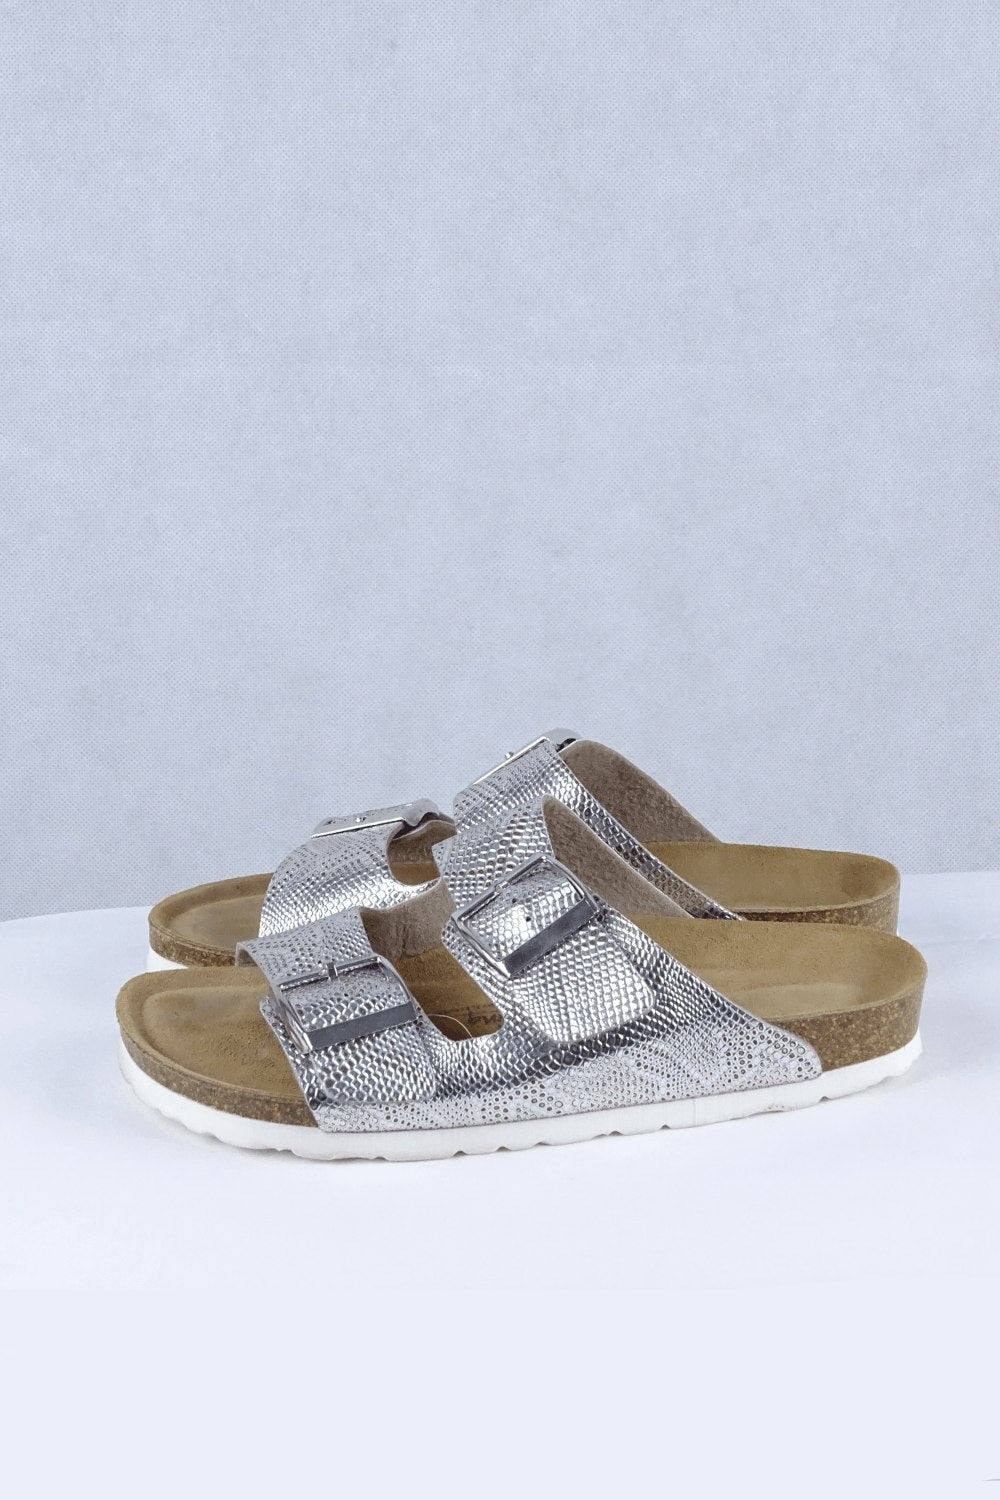 Silver Lining Shoes Silver 6 AU